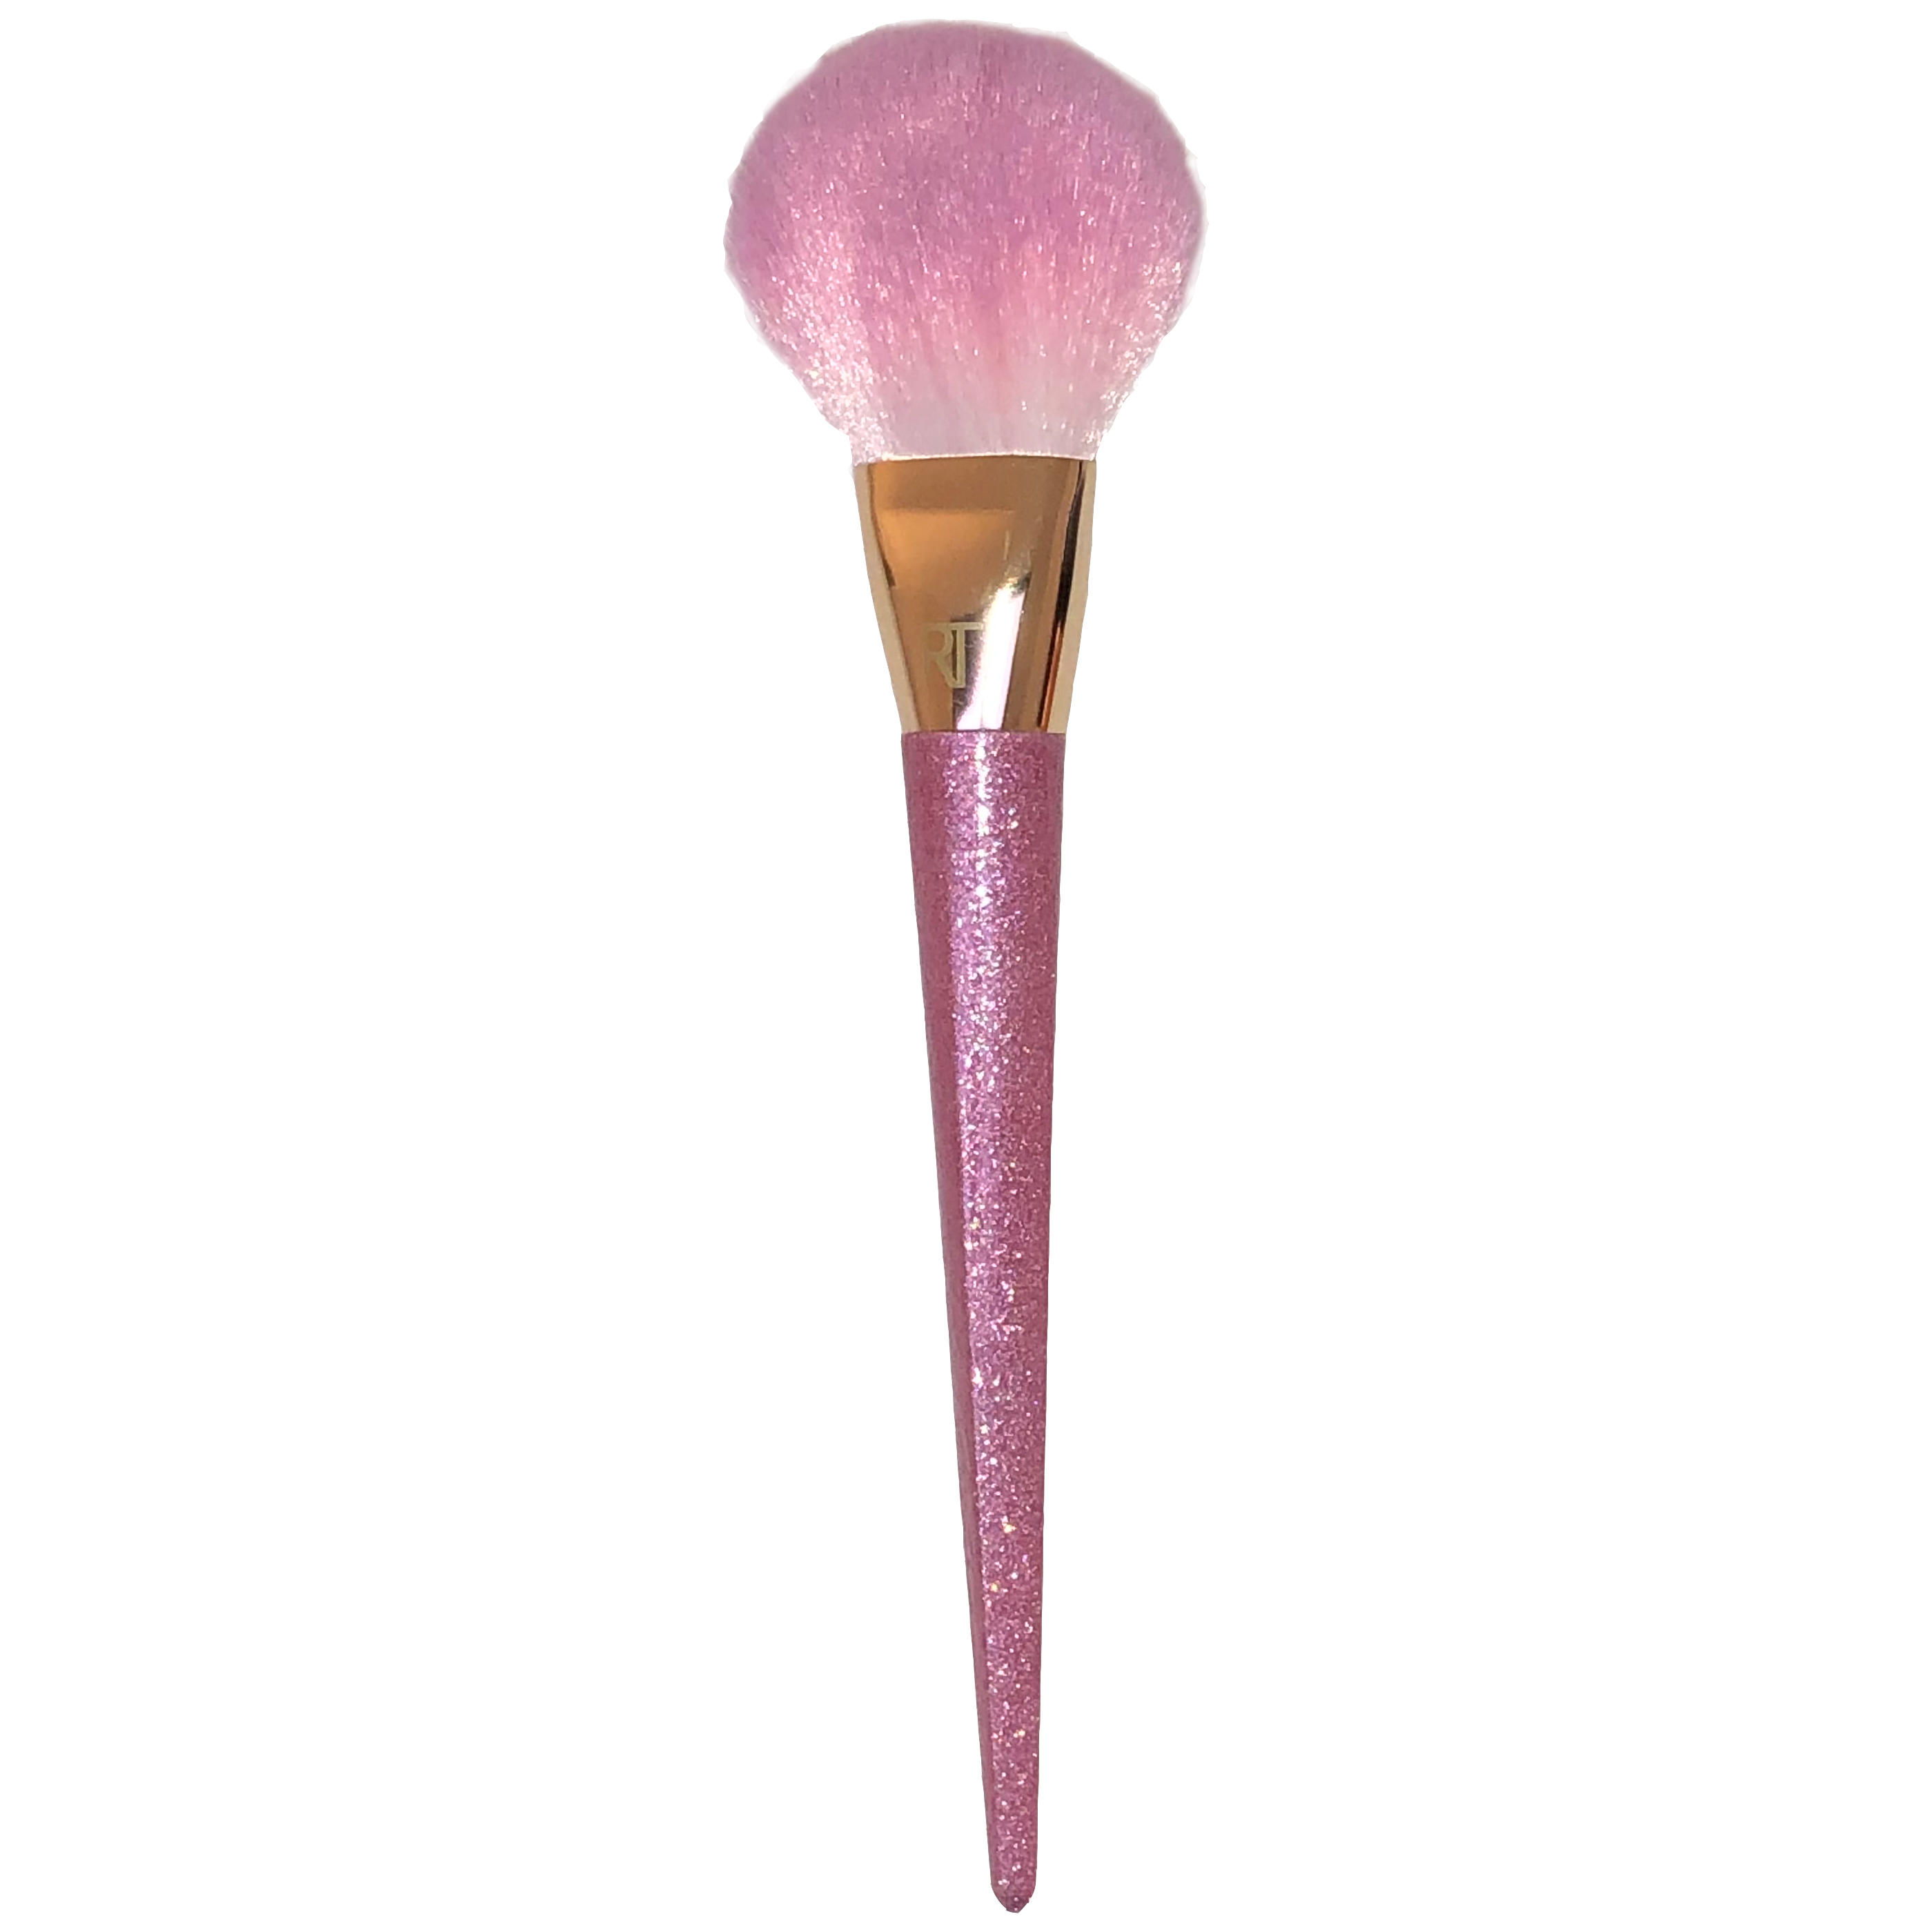 Real Techniques Luxe Powder Puff Face Brush Pink Glitter